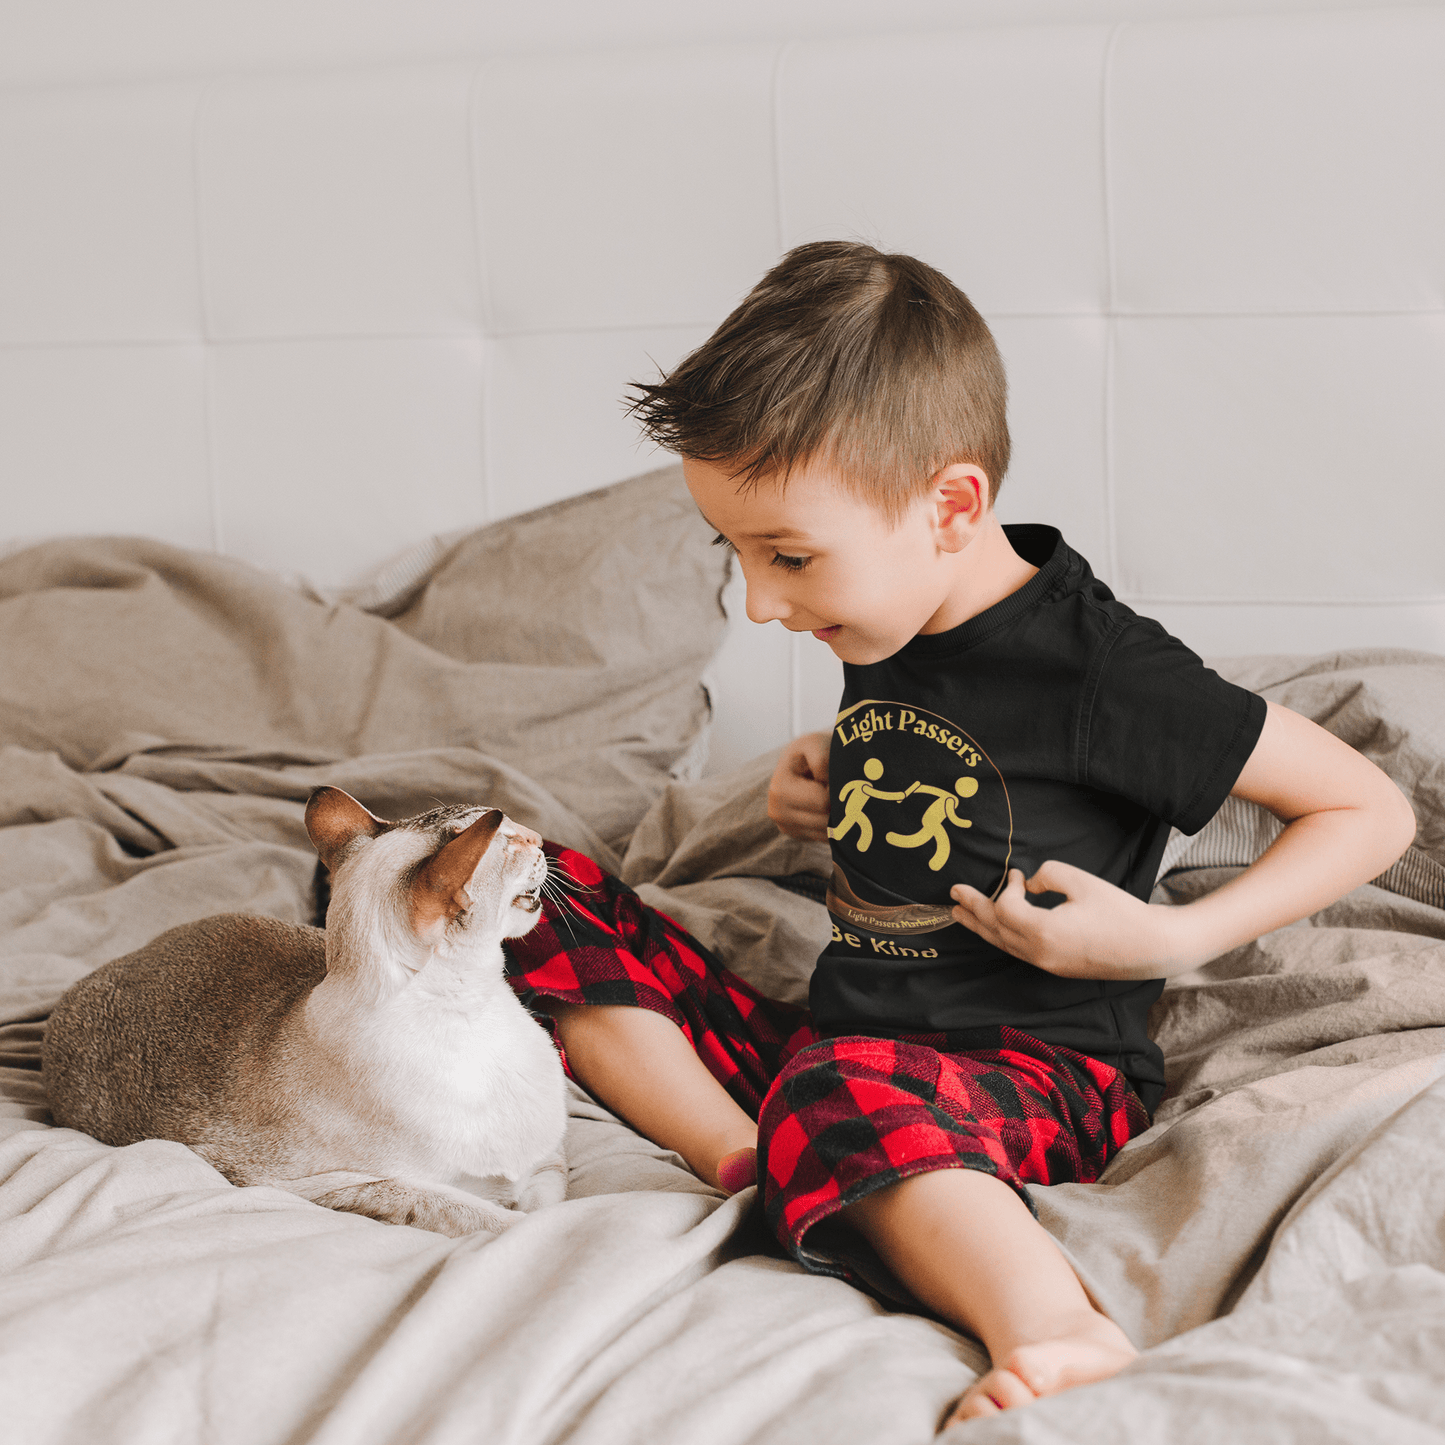 A toddler wearing a Light Passers Relay Be Kind T-shirt, playing with a cat on a bed. Soft 100% combed cotton, durable print, tear-away label, perfect for sensitive skin.